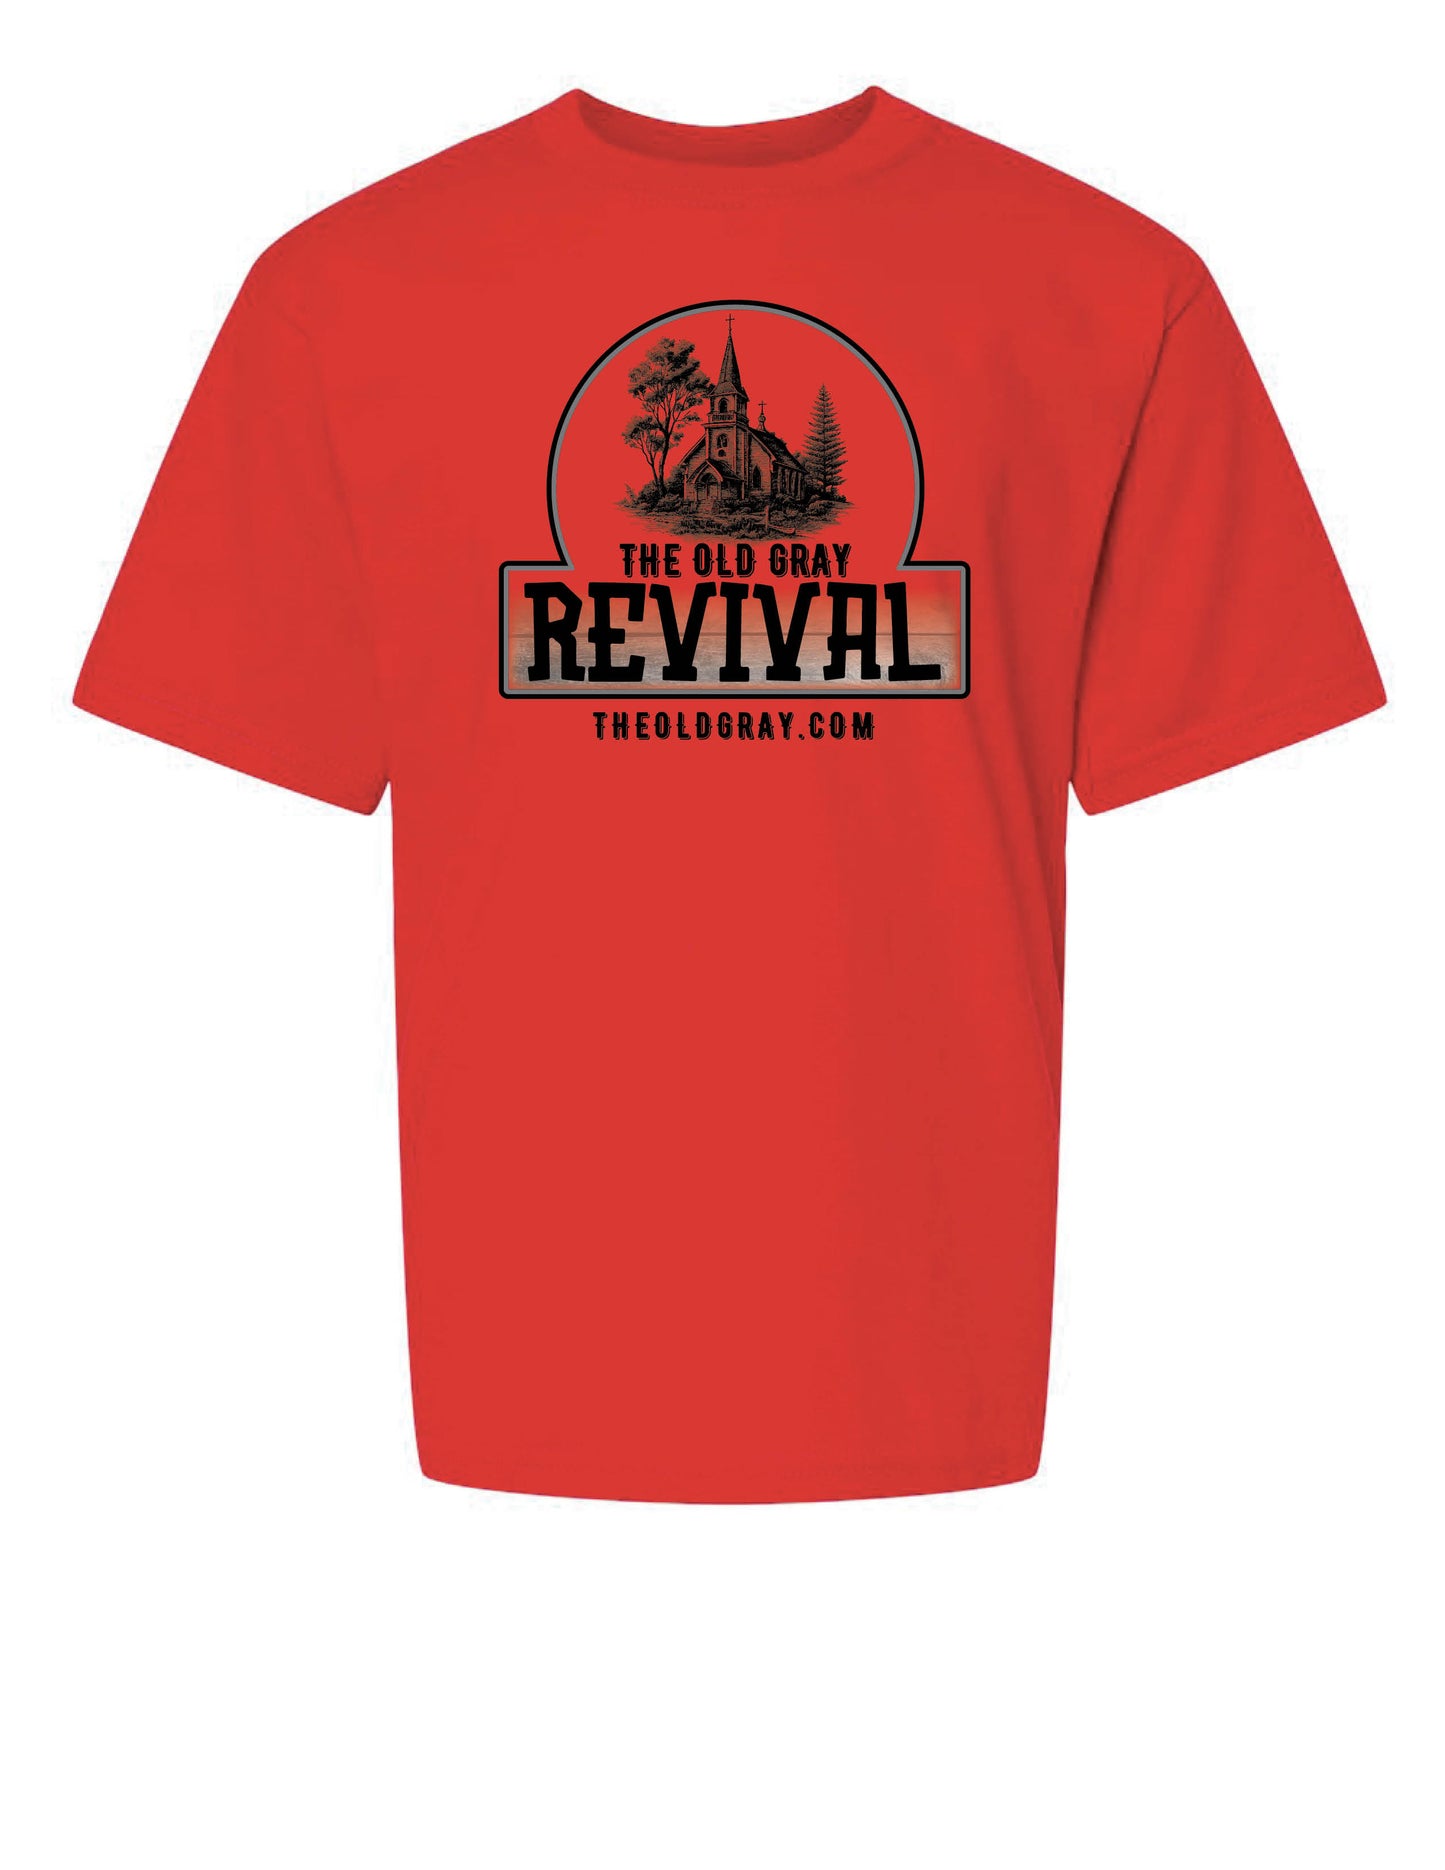 YOUTH - The Old Gray Revival T Shirt